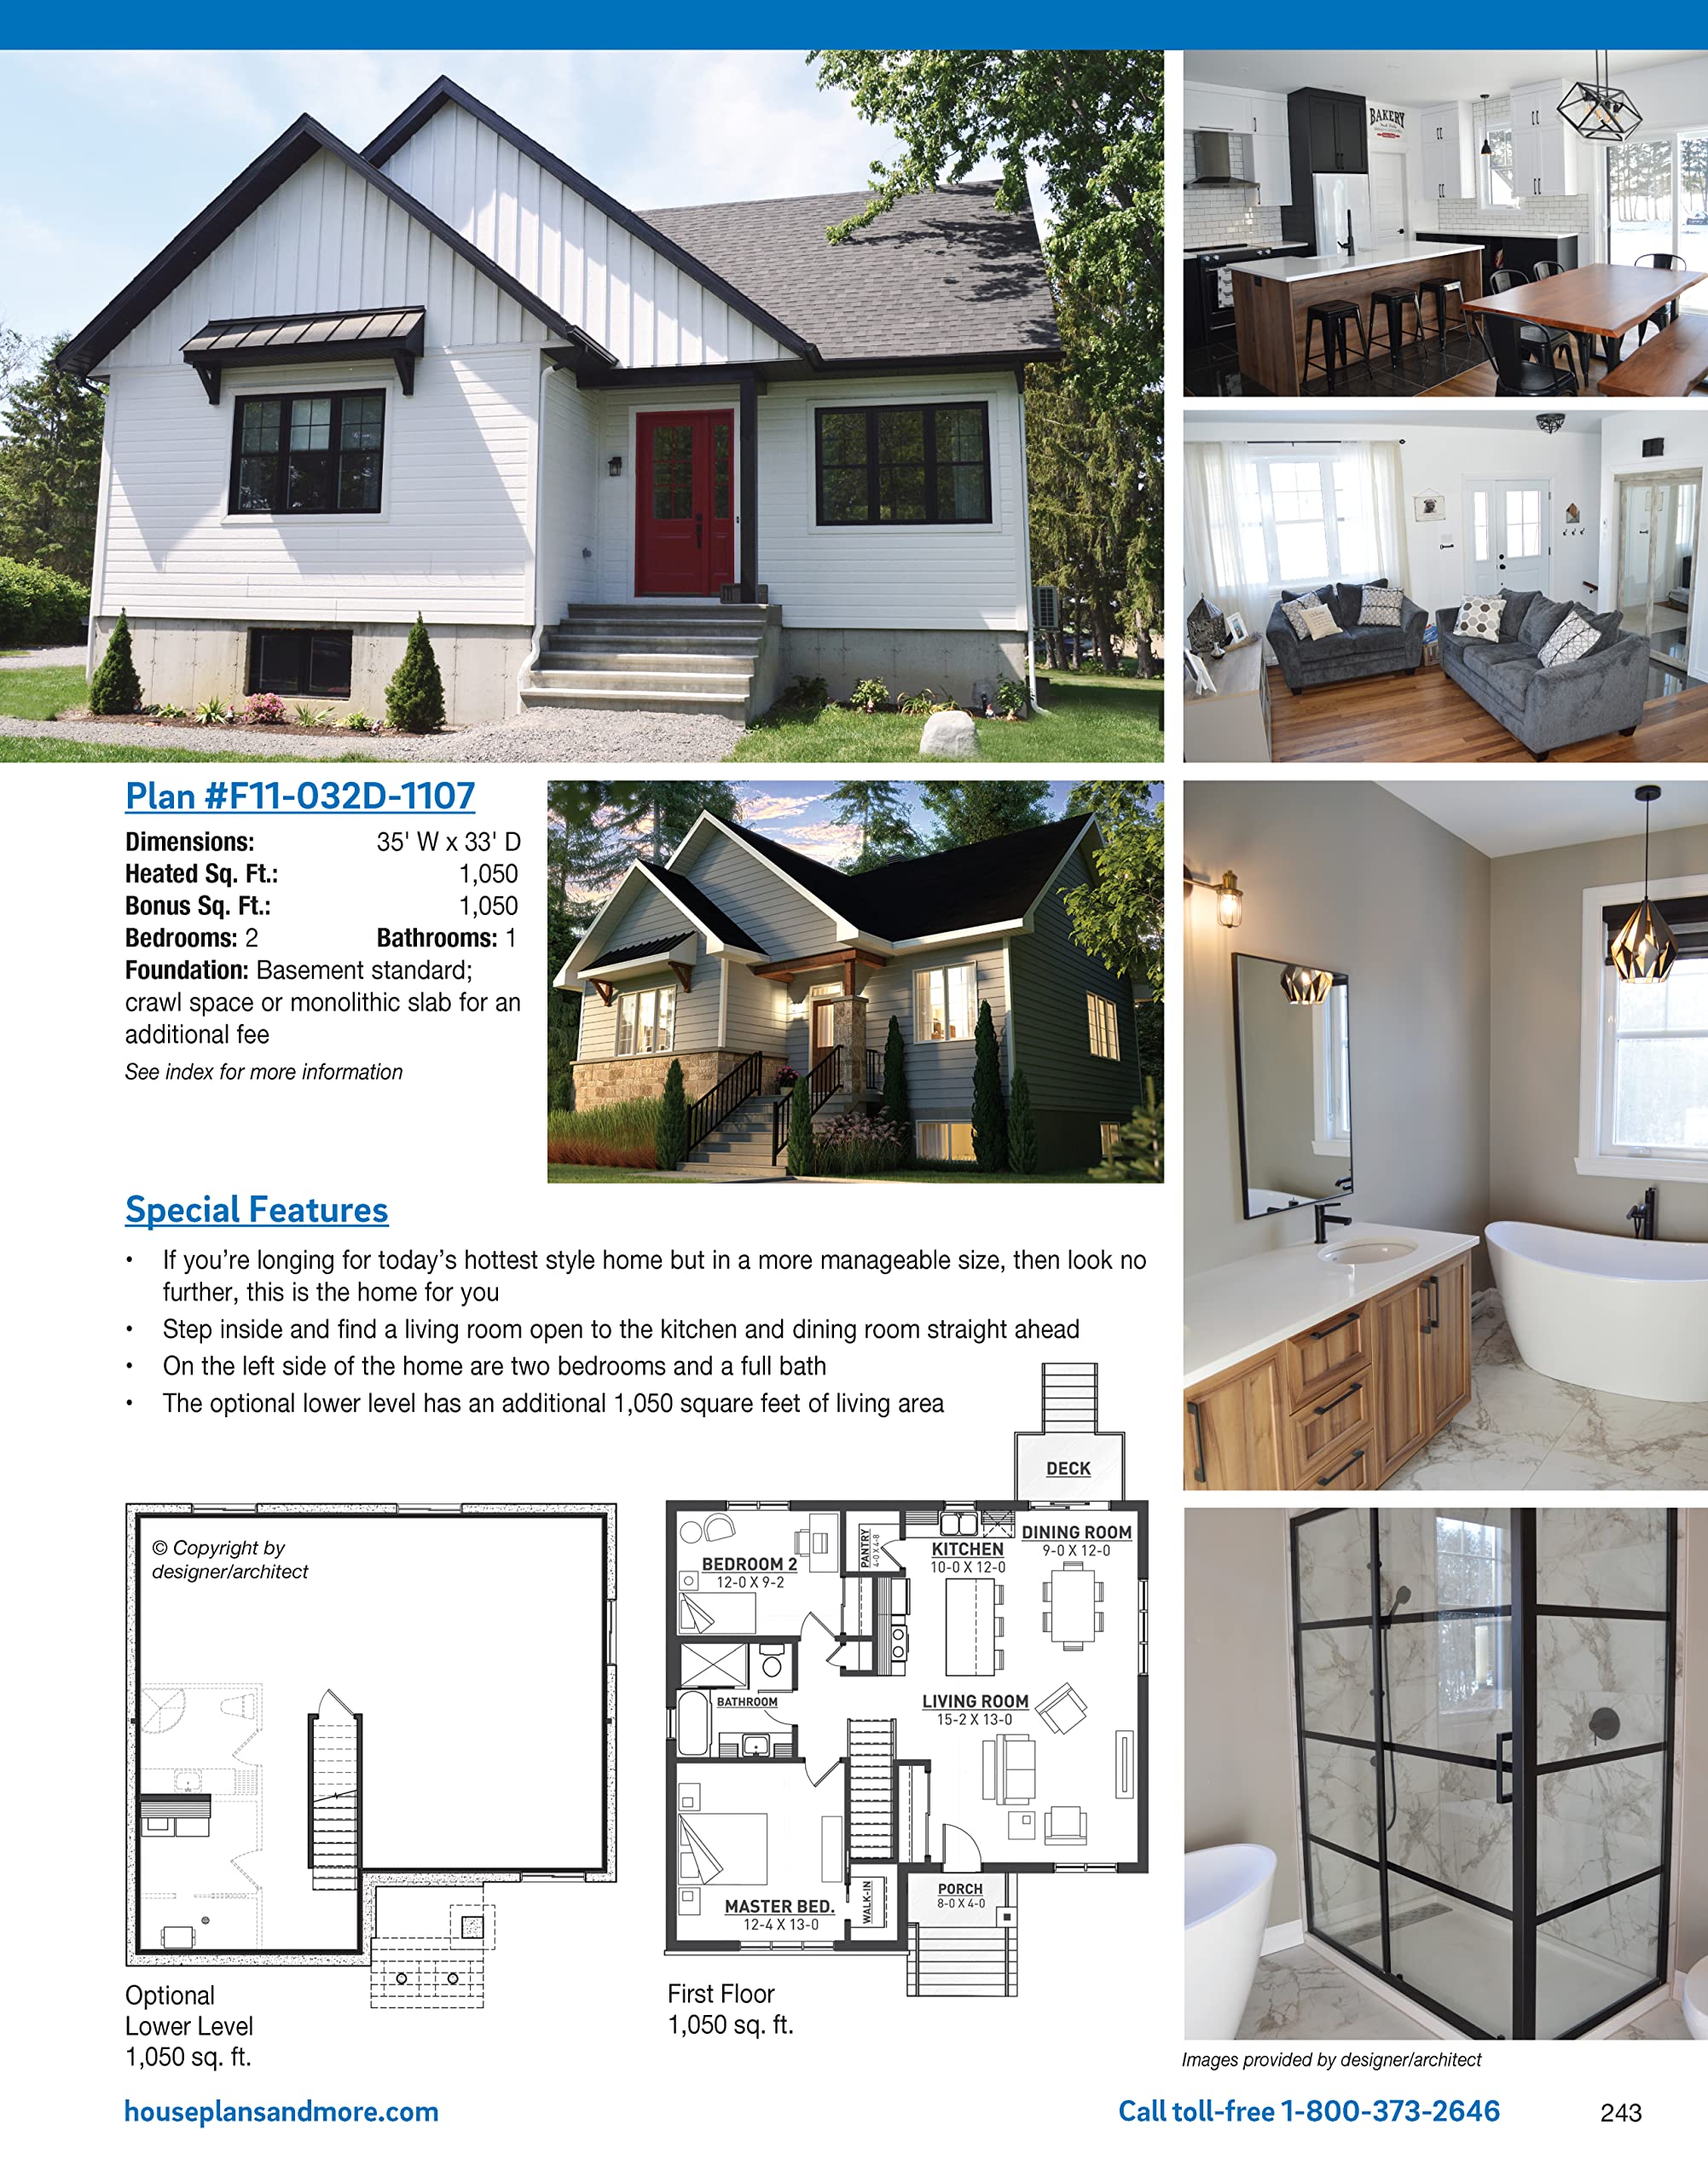 Ultimate Book of Modern Farmhouse Plans: 350 Illustrated Designs (Creative Homeowner) Catalog of Home Plans, plus Guidance on Modern Decorating, Functional Rooms, Outdoor Living, Kitchens, and More